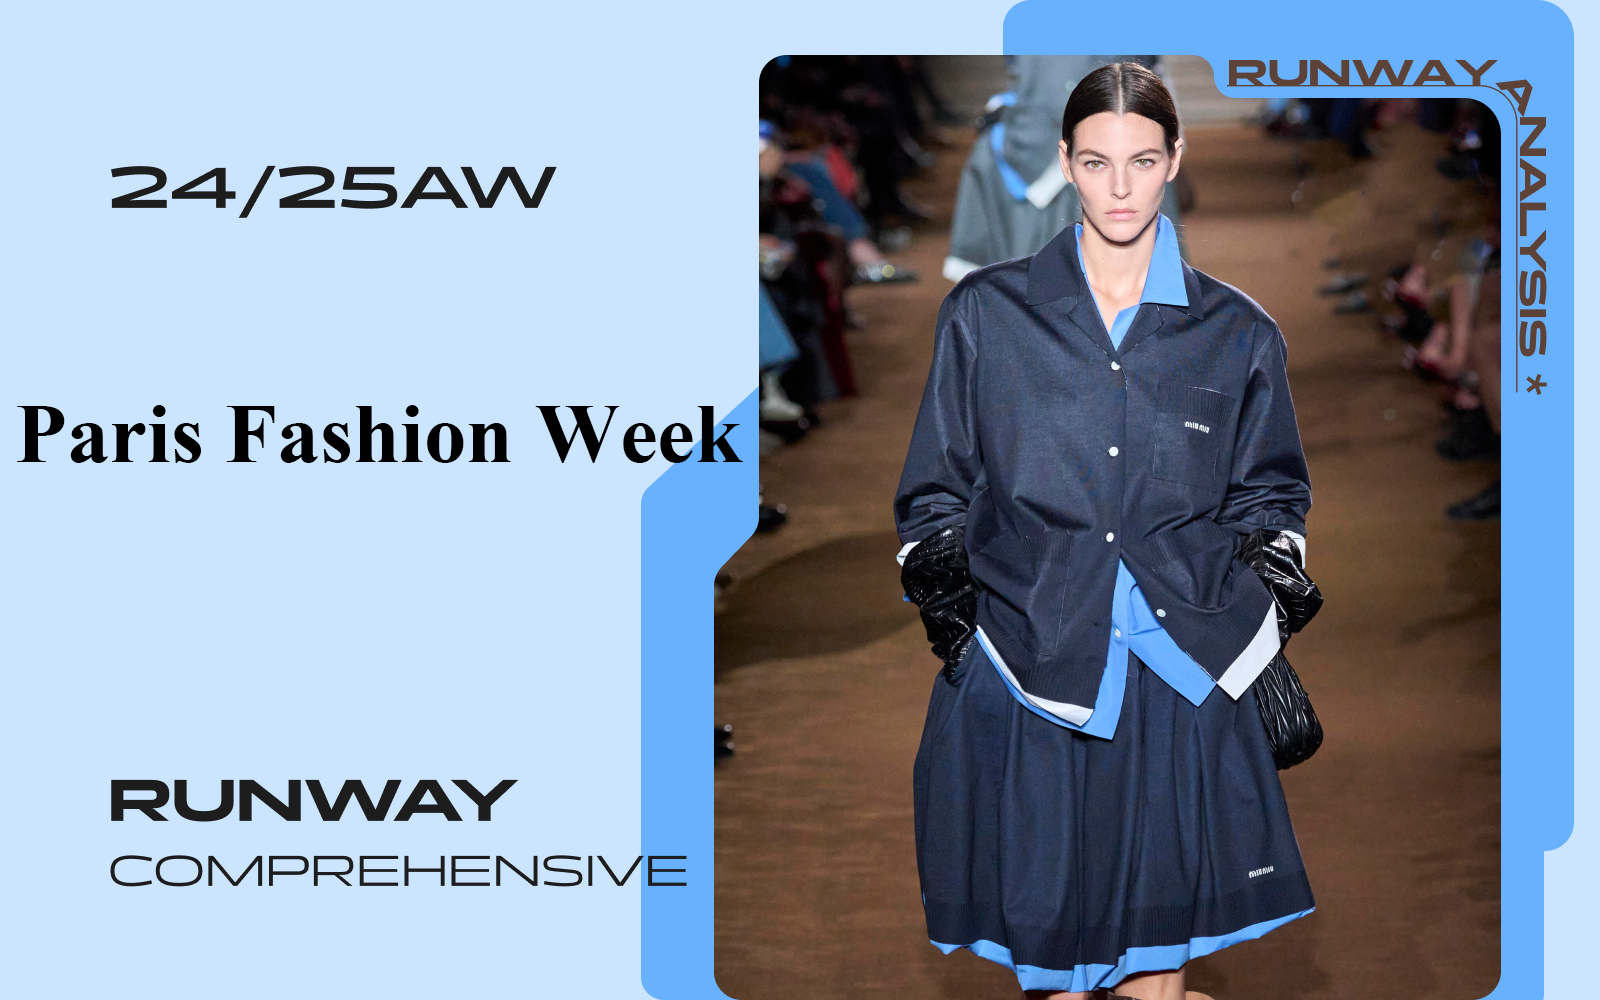 Paris Fashion Week -- Recommended Womenswear Brand